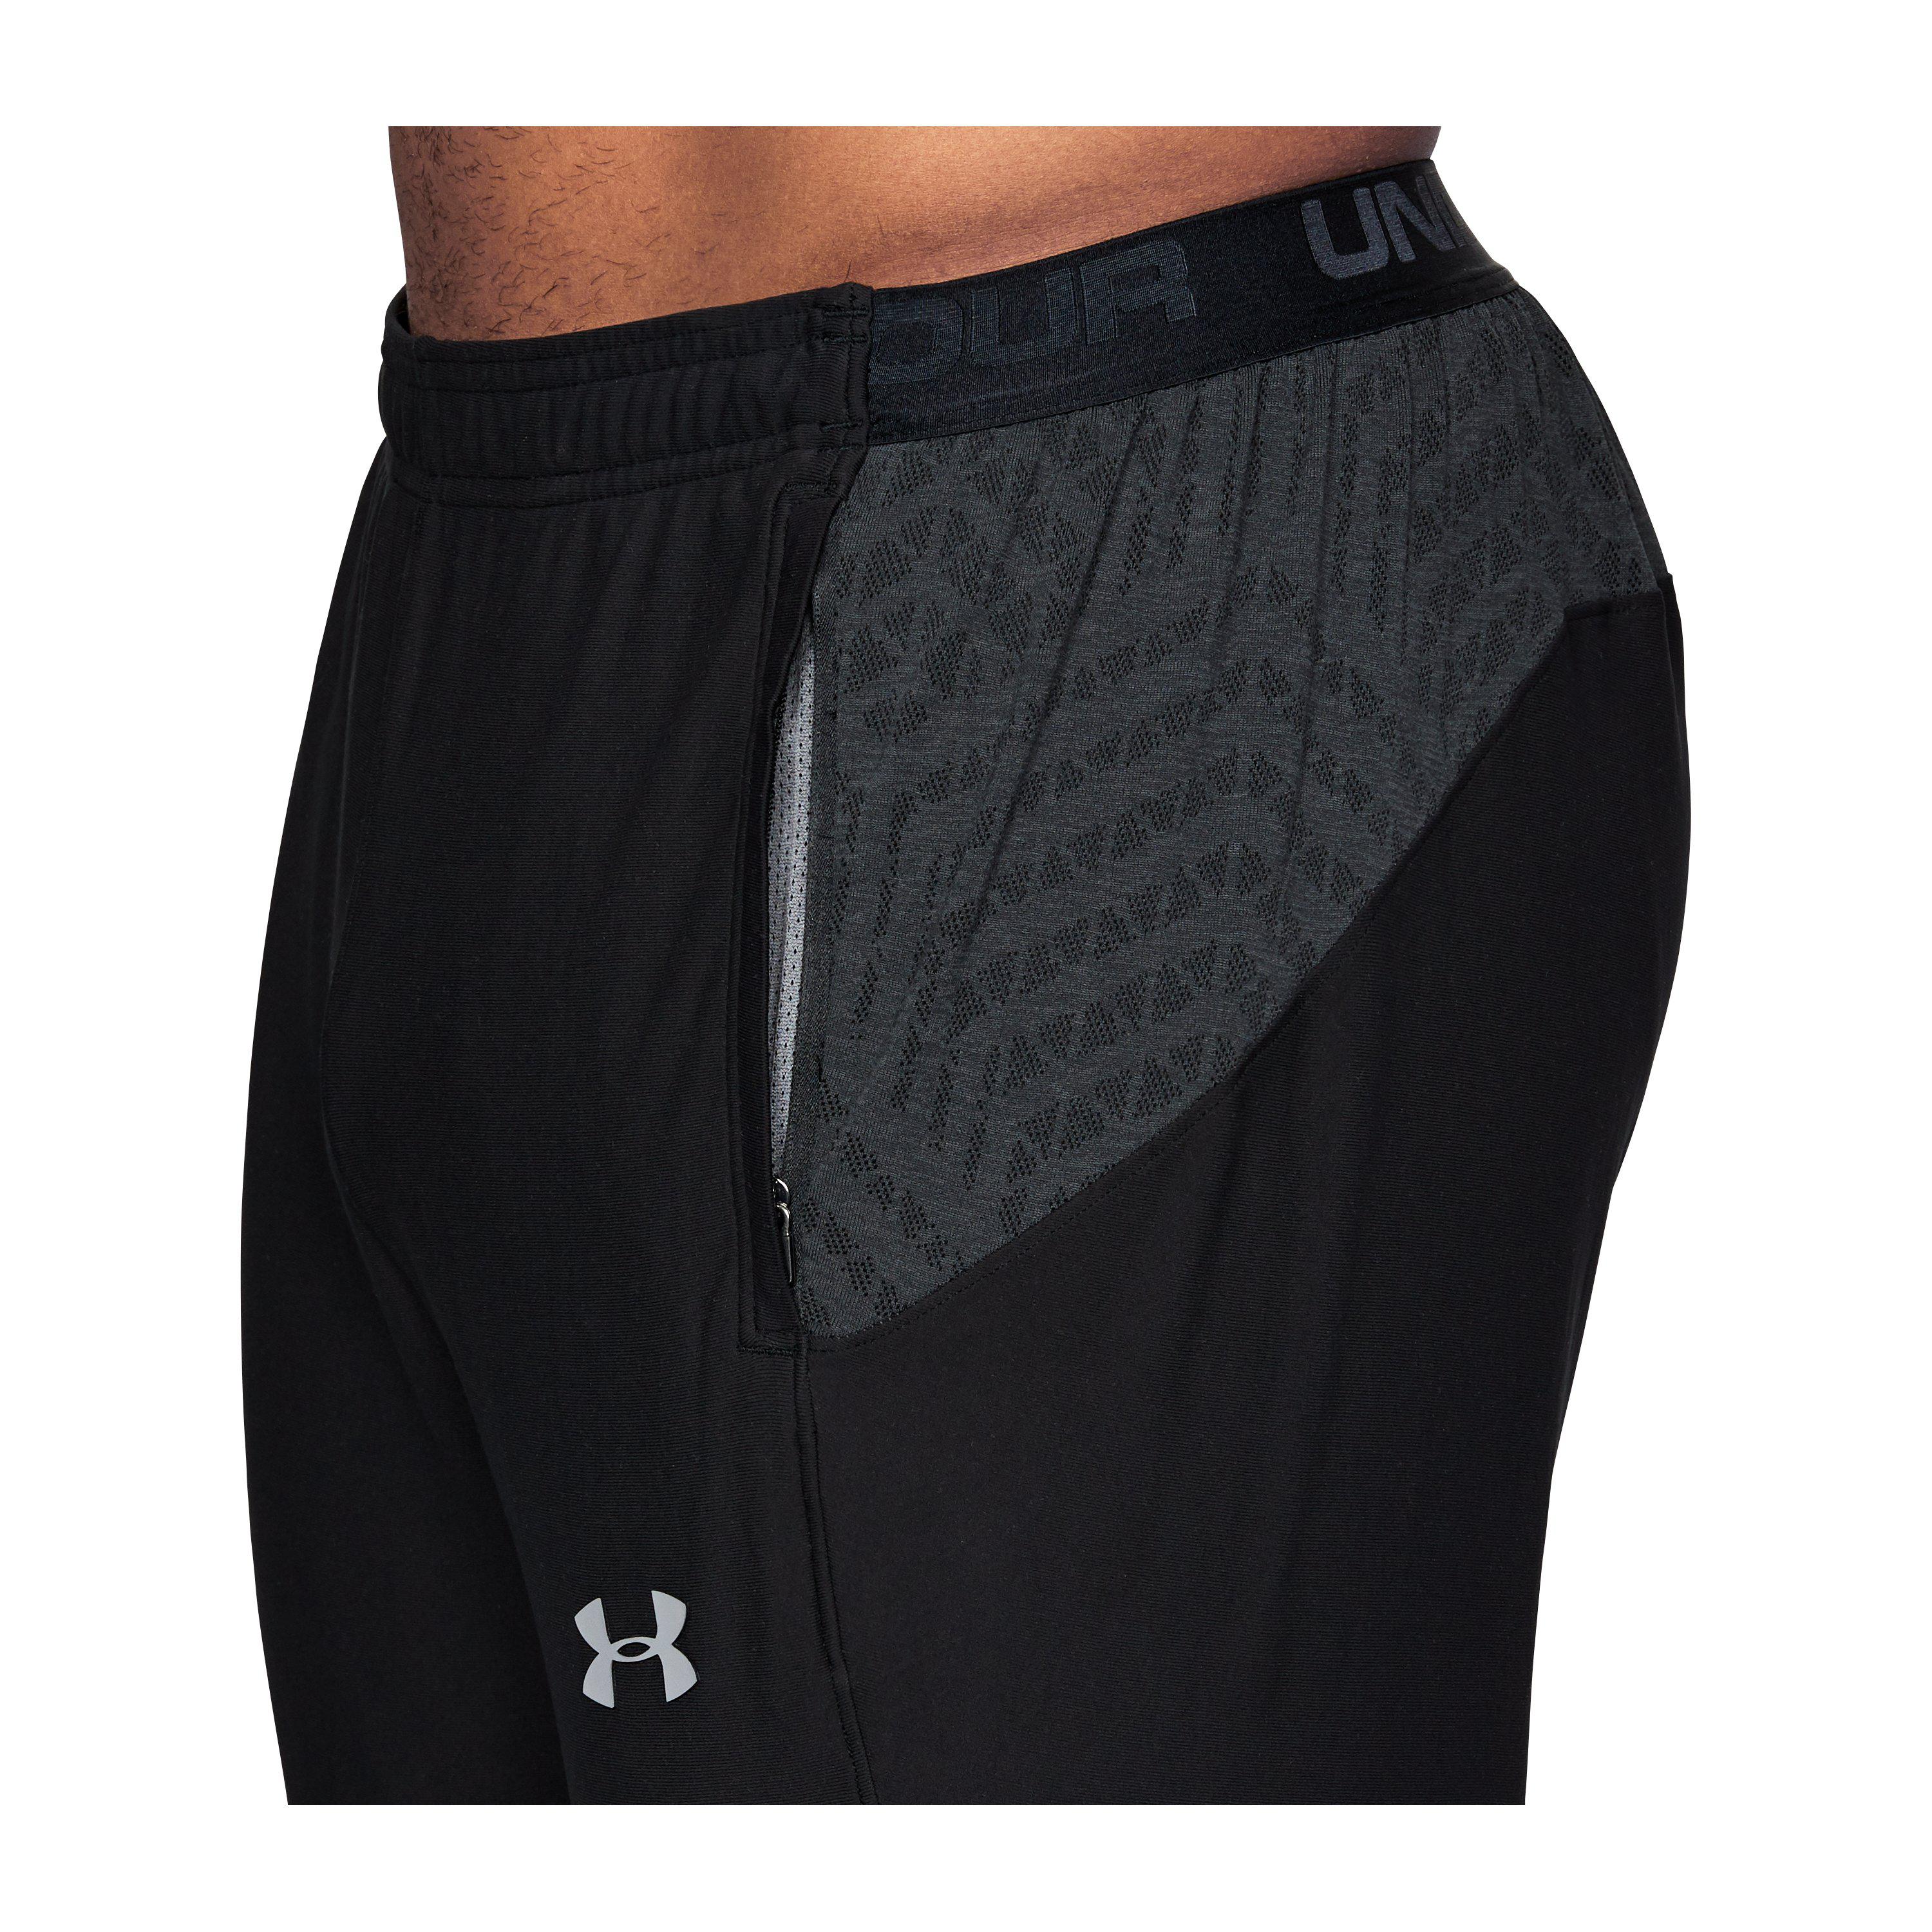 under armour accelerate training pant